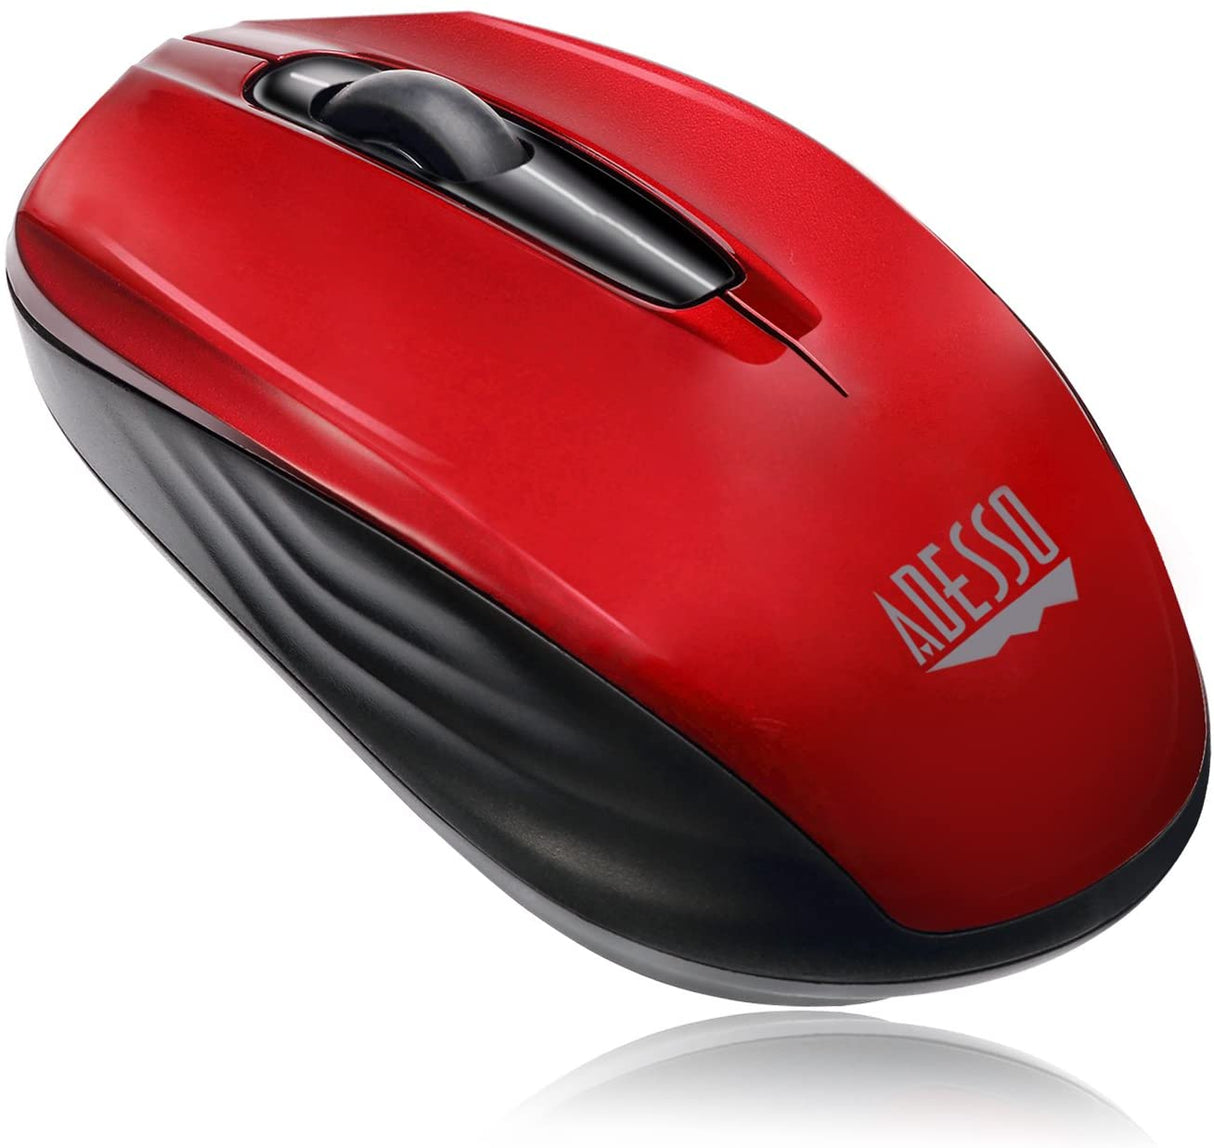 Adesso Ergonomic iMouse S50 - Wireless Optical Mouse (Red) - Dealtargets.com